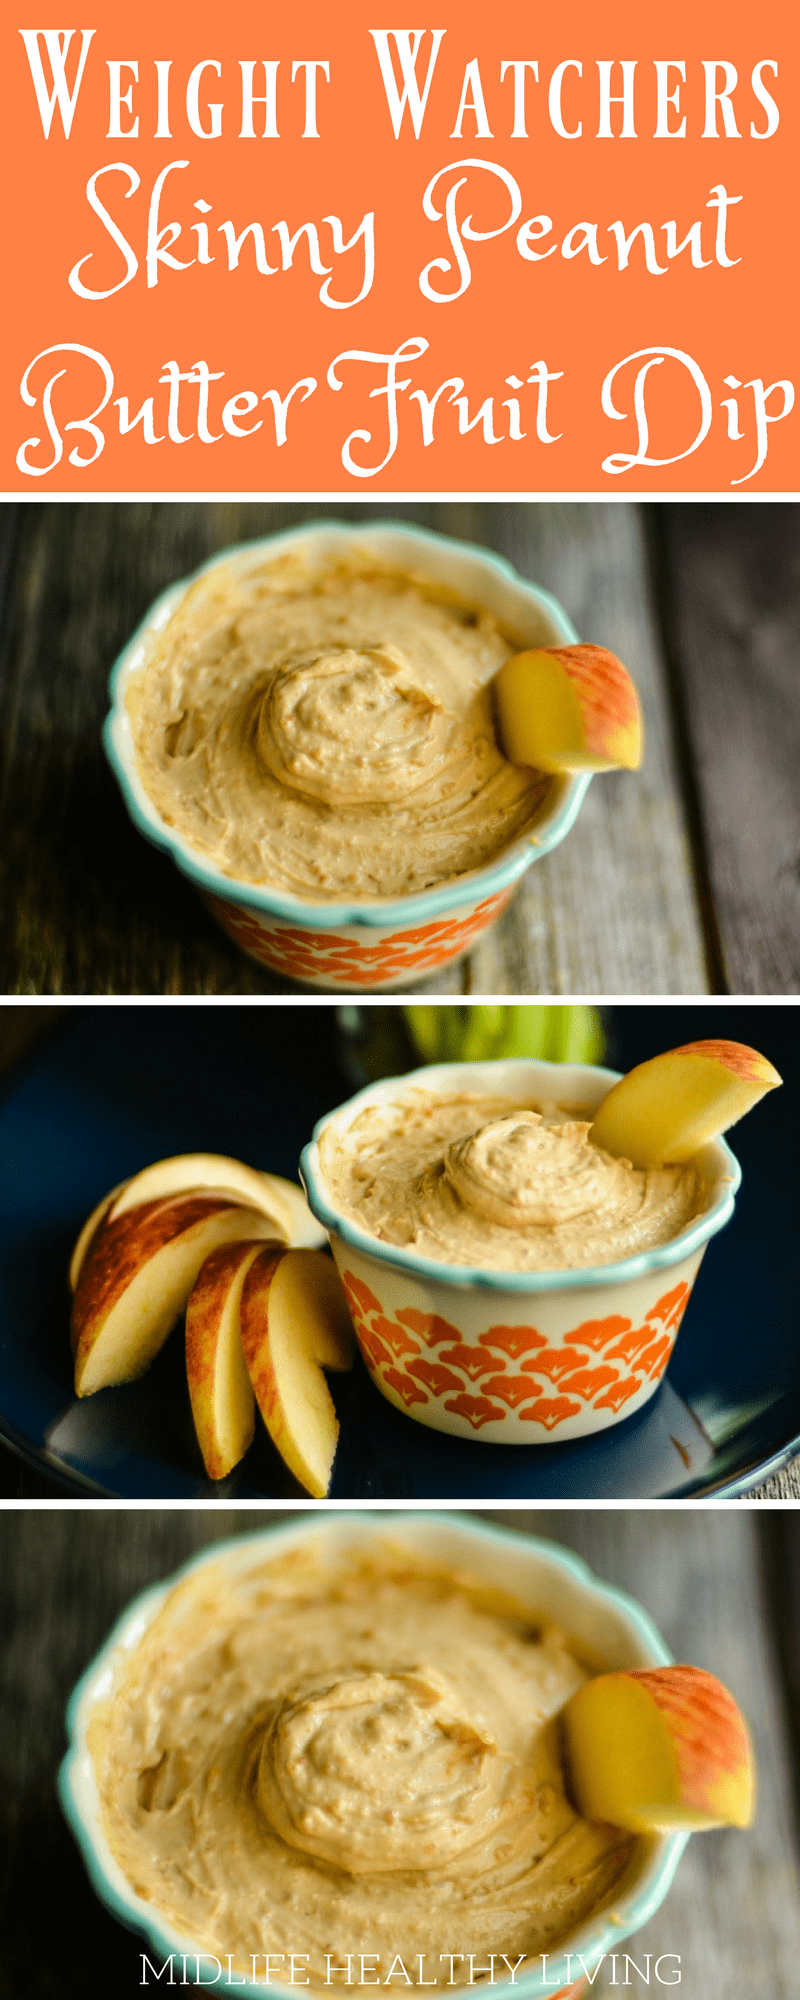 Skinny Peanut Butter Fruit Dip Recipe is easy to make and tastes great. It takes just two simple ingredients and you will have yourself a delicious and nutritious snack to dip with fruit or eat by the spoonful! 